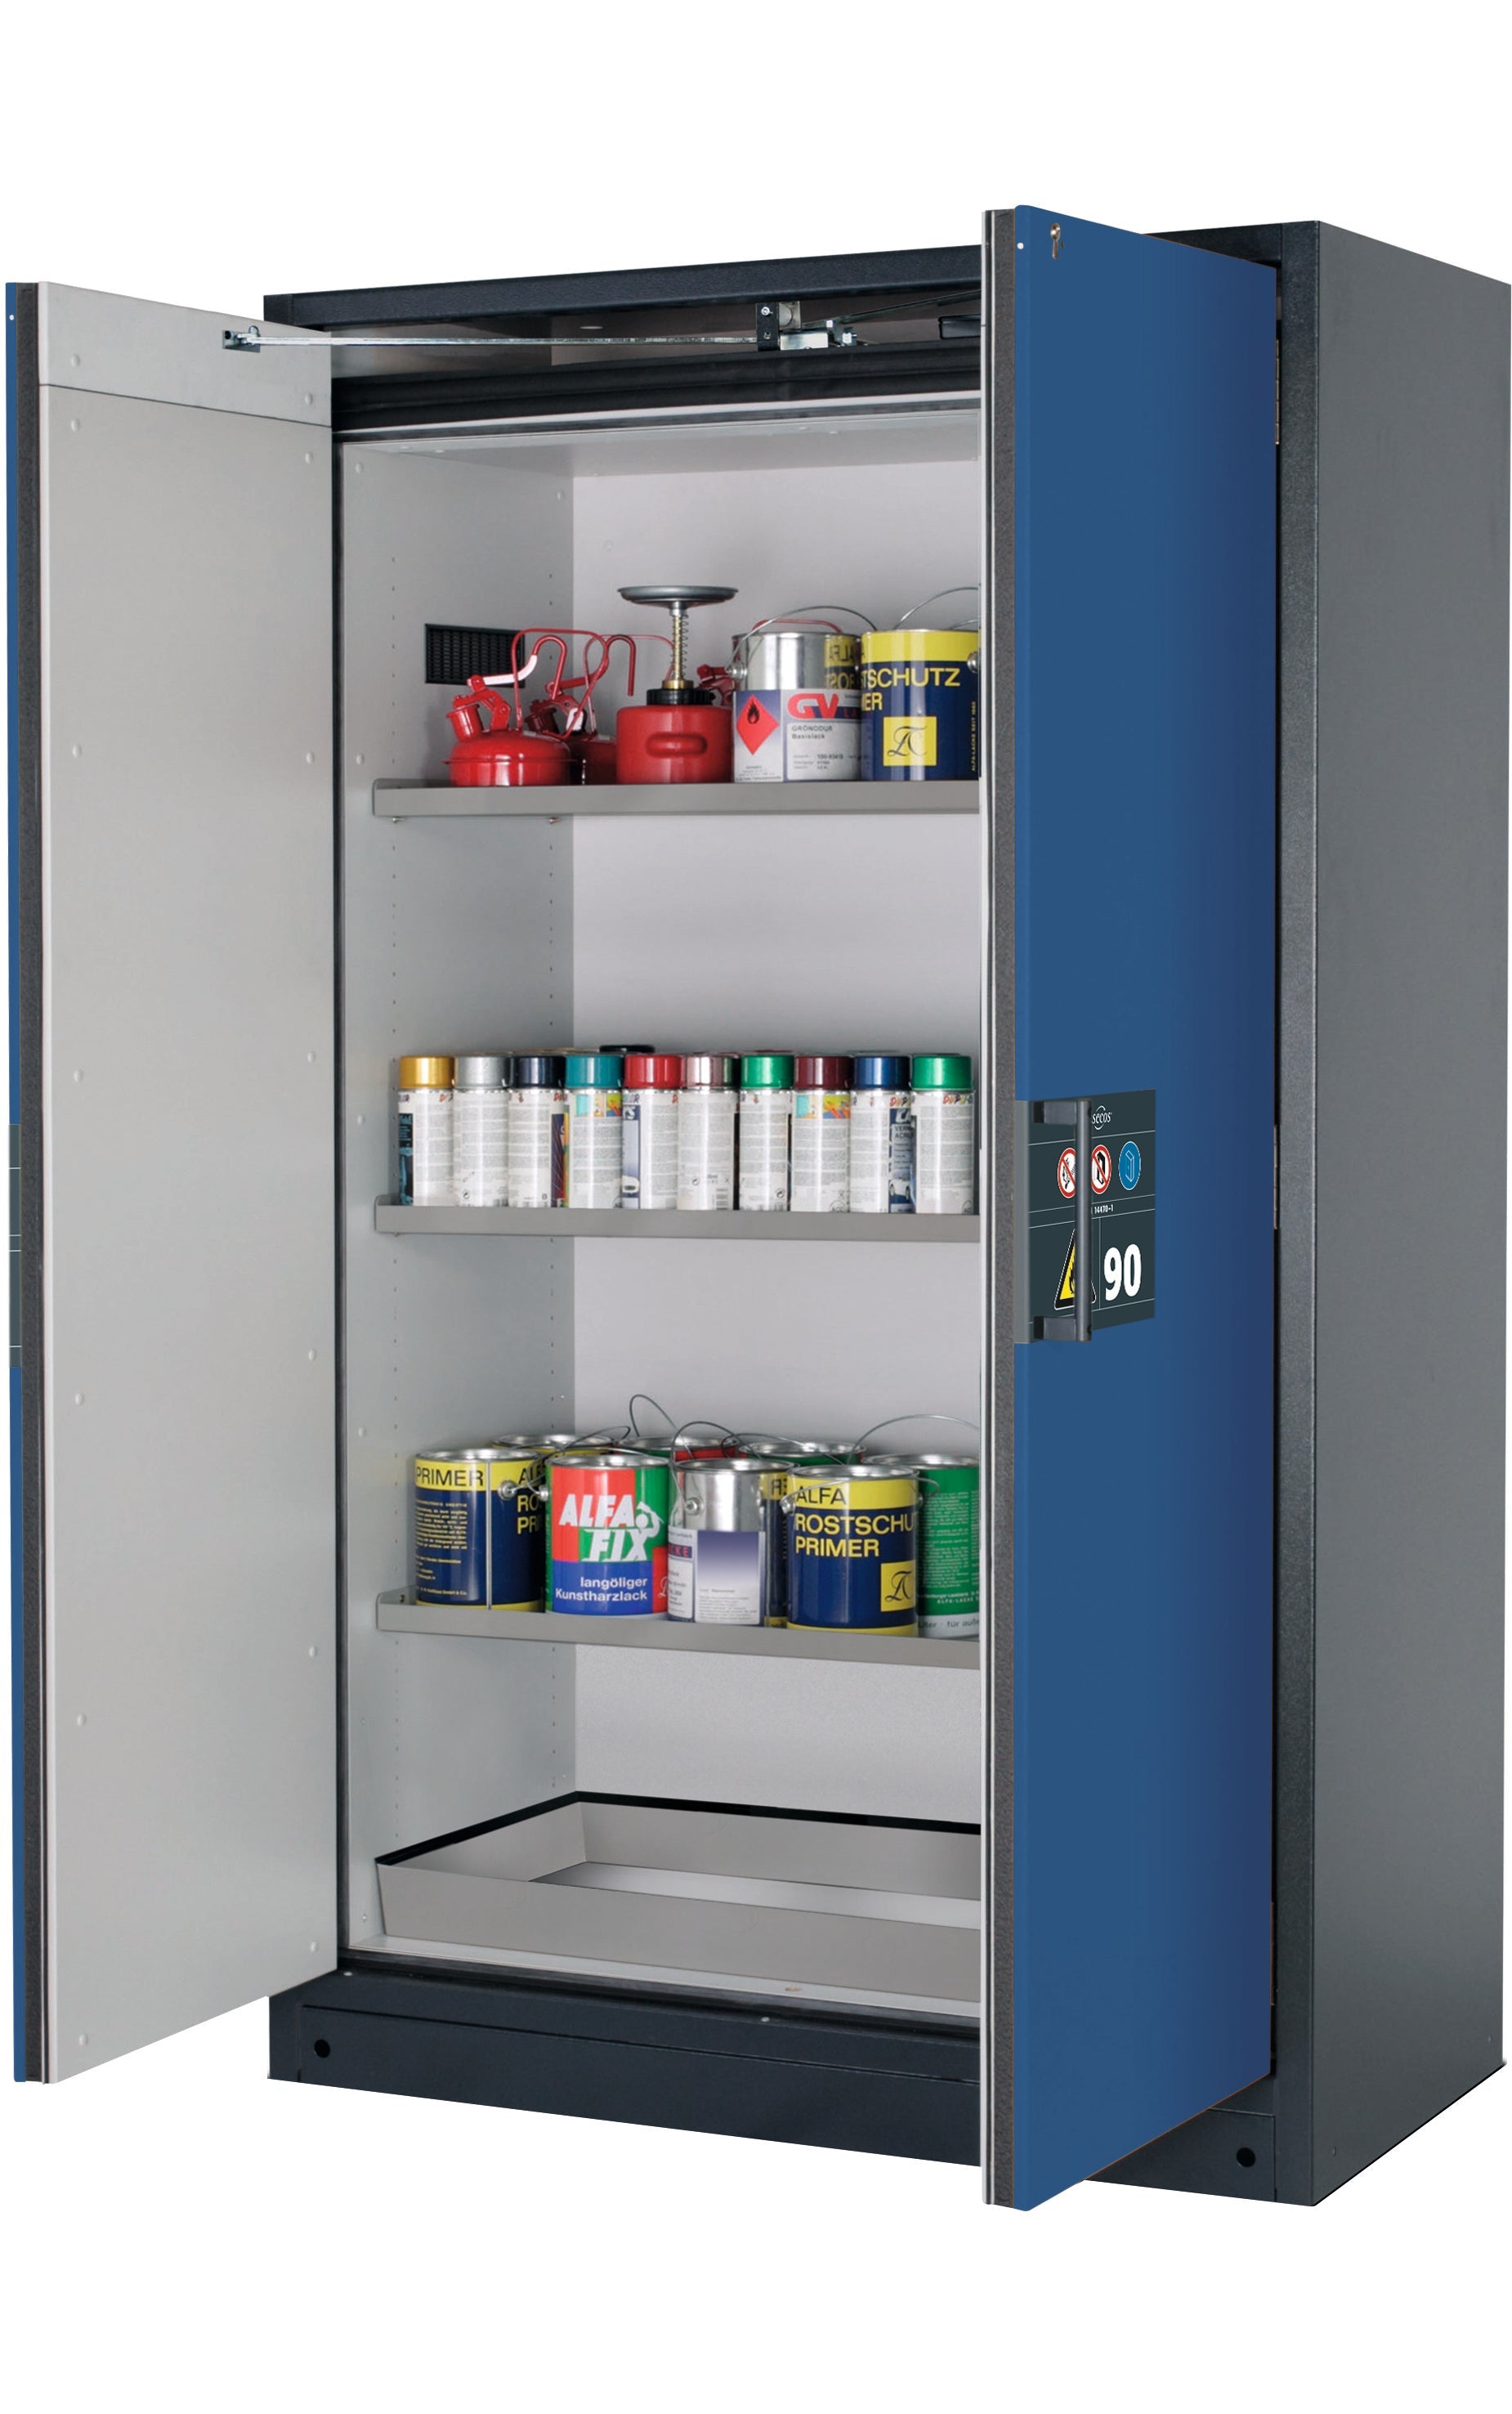 Type 90 safety storage cabinet Q-PEGASUS-90 model Q90.195.120.WDAC in gentian blue RAL 5010 with 3x shelf standard (stainless steel 1.4301),